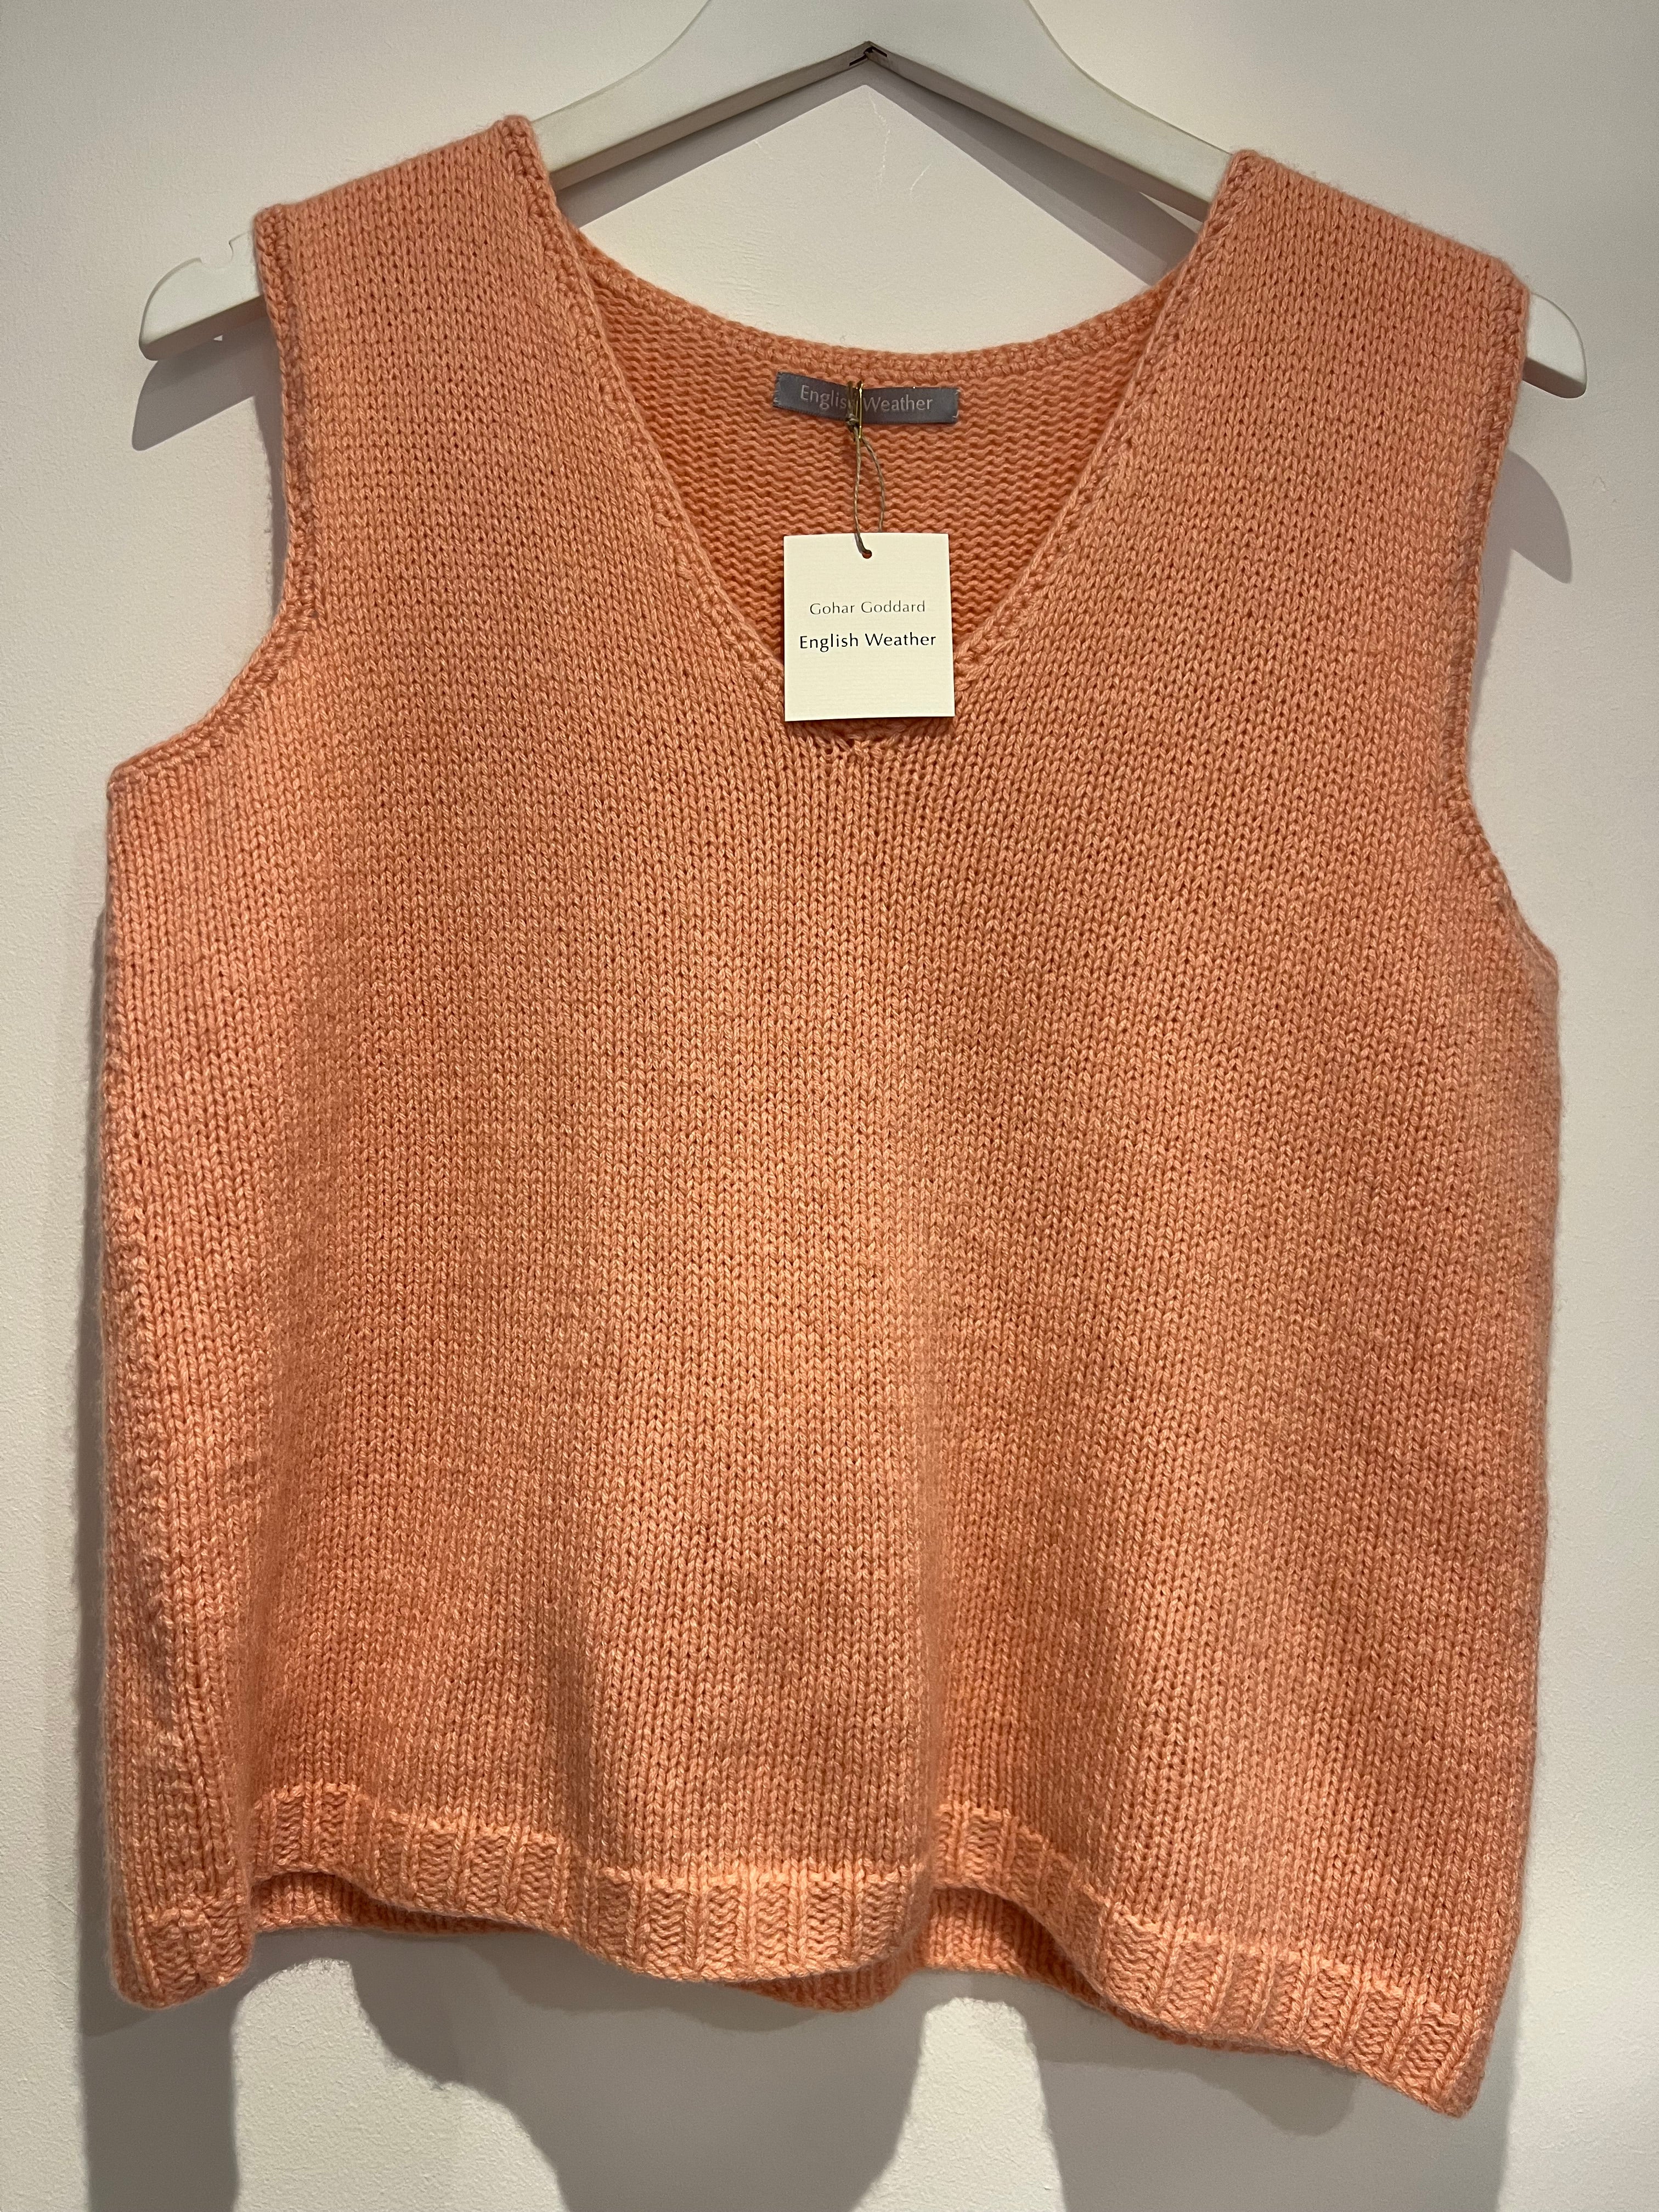 Hetre Alresford Hampshire Clothes Store English Weather Sea Pink Cashmere Tank Top 